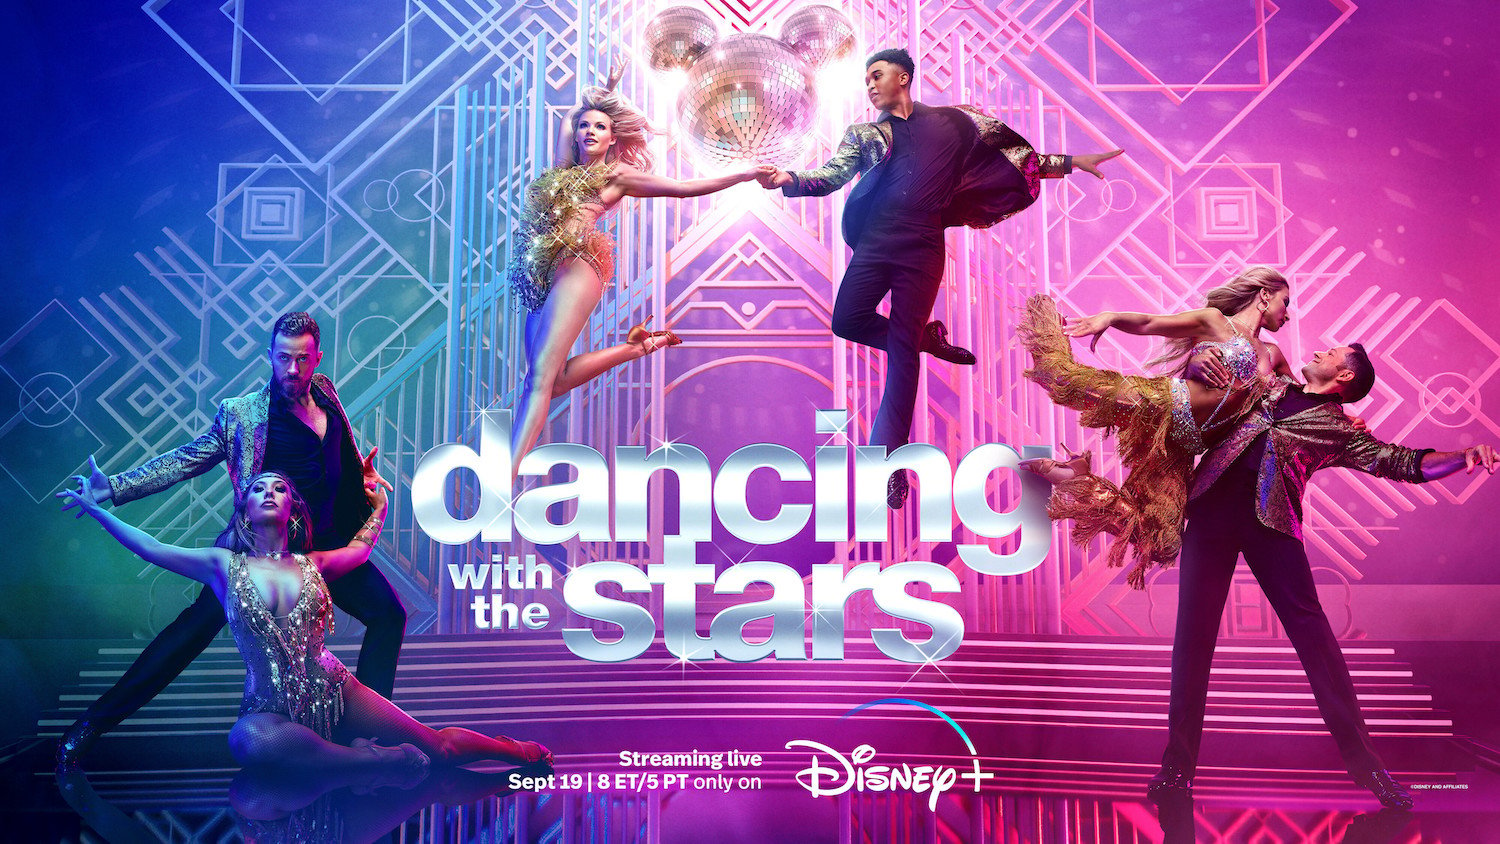 Press image for 'Dancing with the Stars' Season 31, which will feature a James Bond theme night